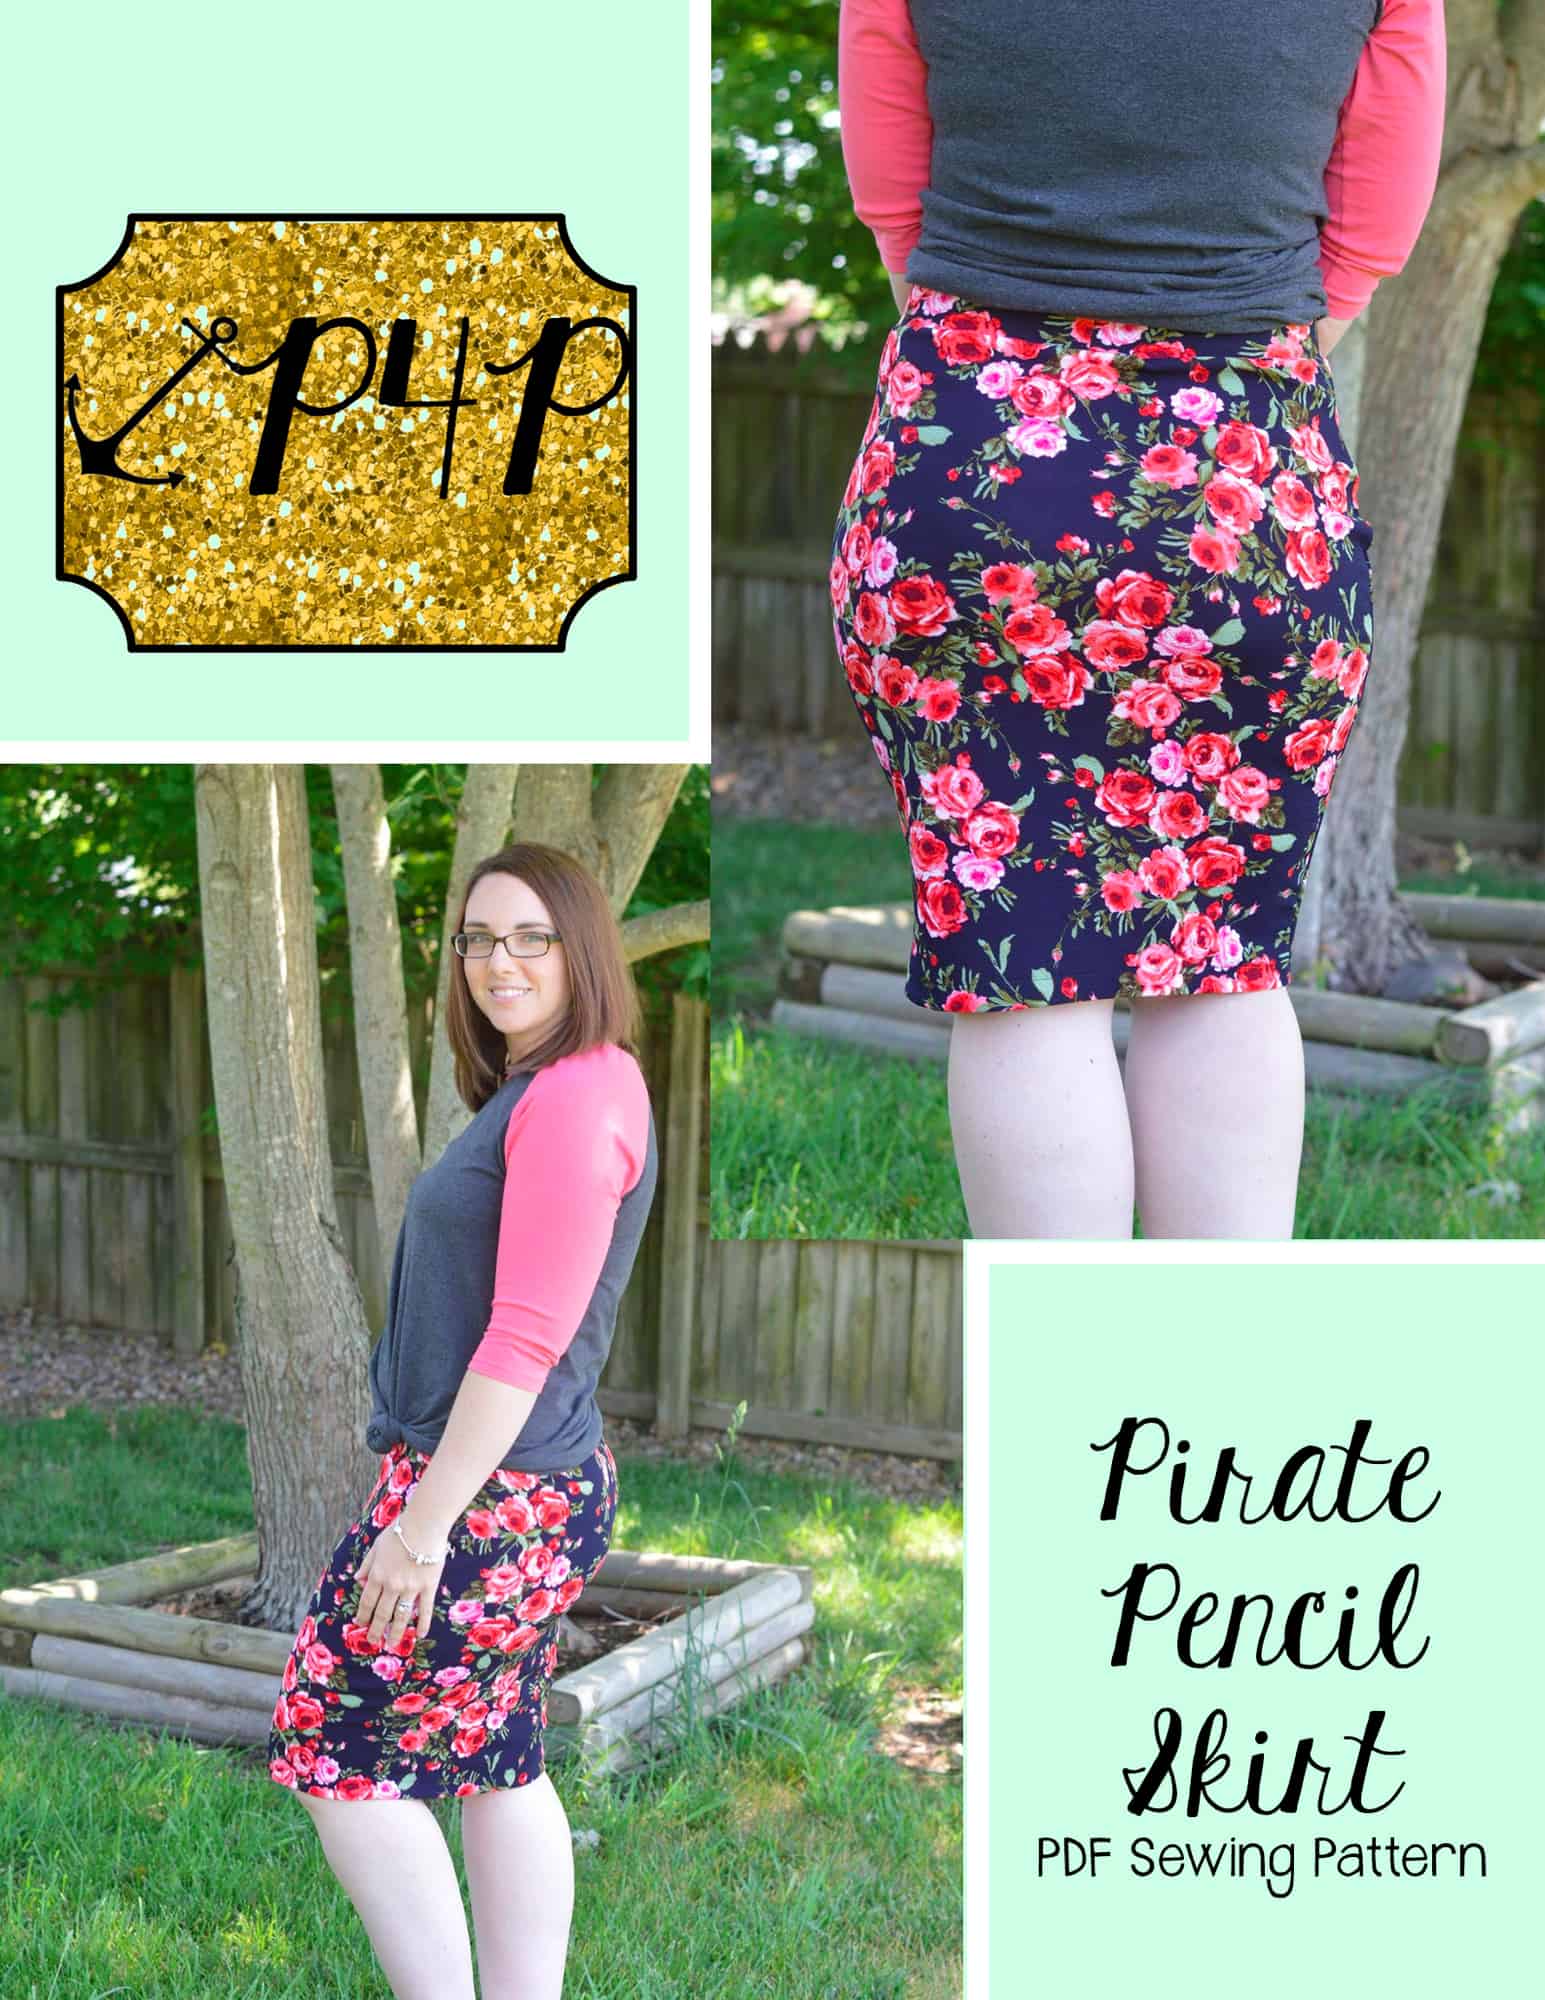 Pirate Pencil Skirt - Patterns for Pirates